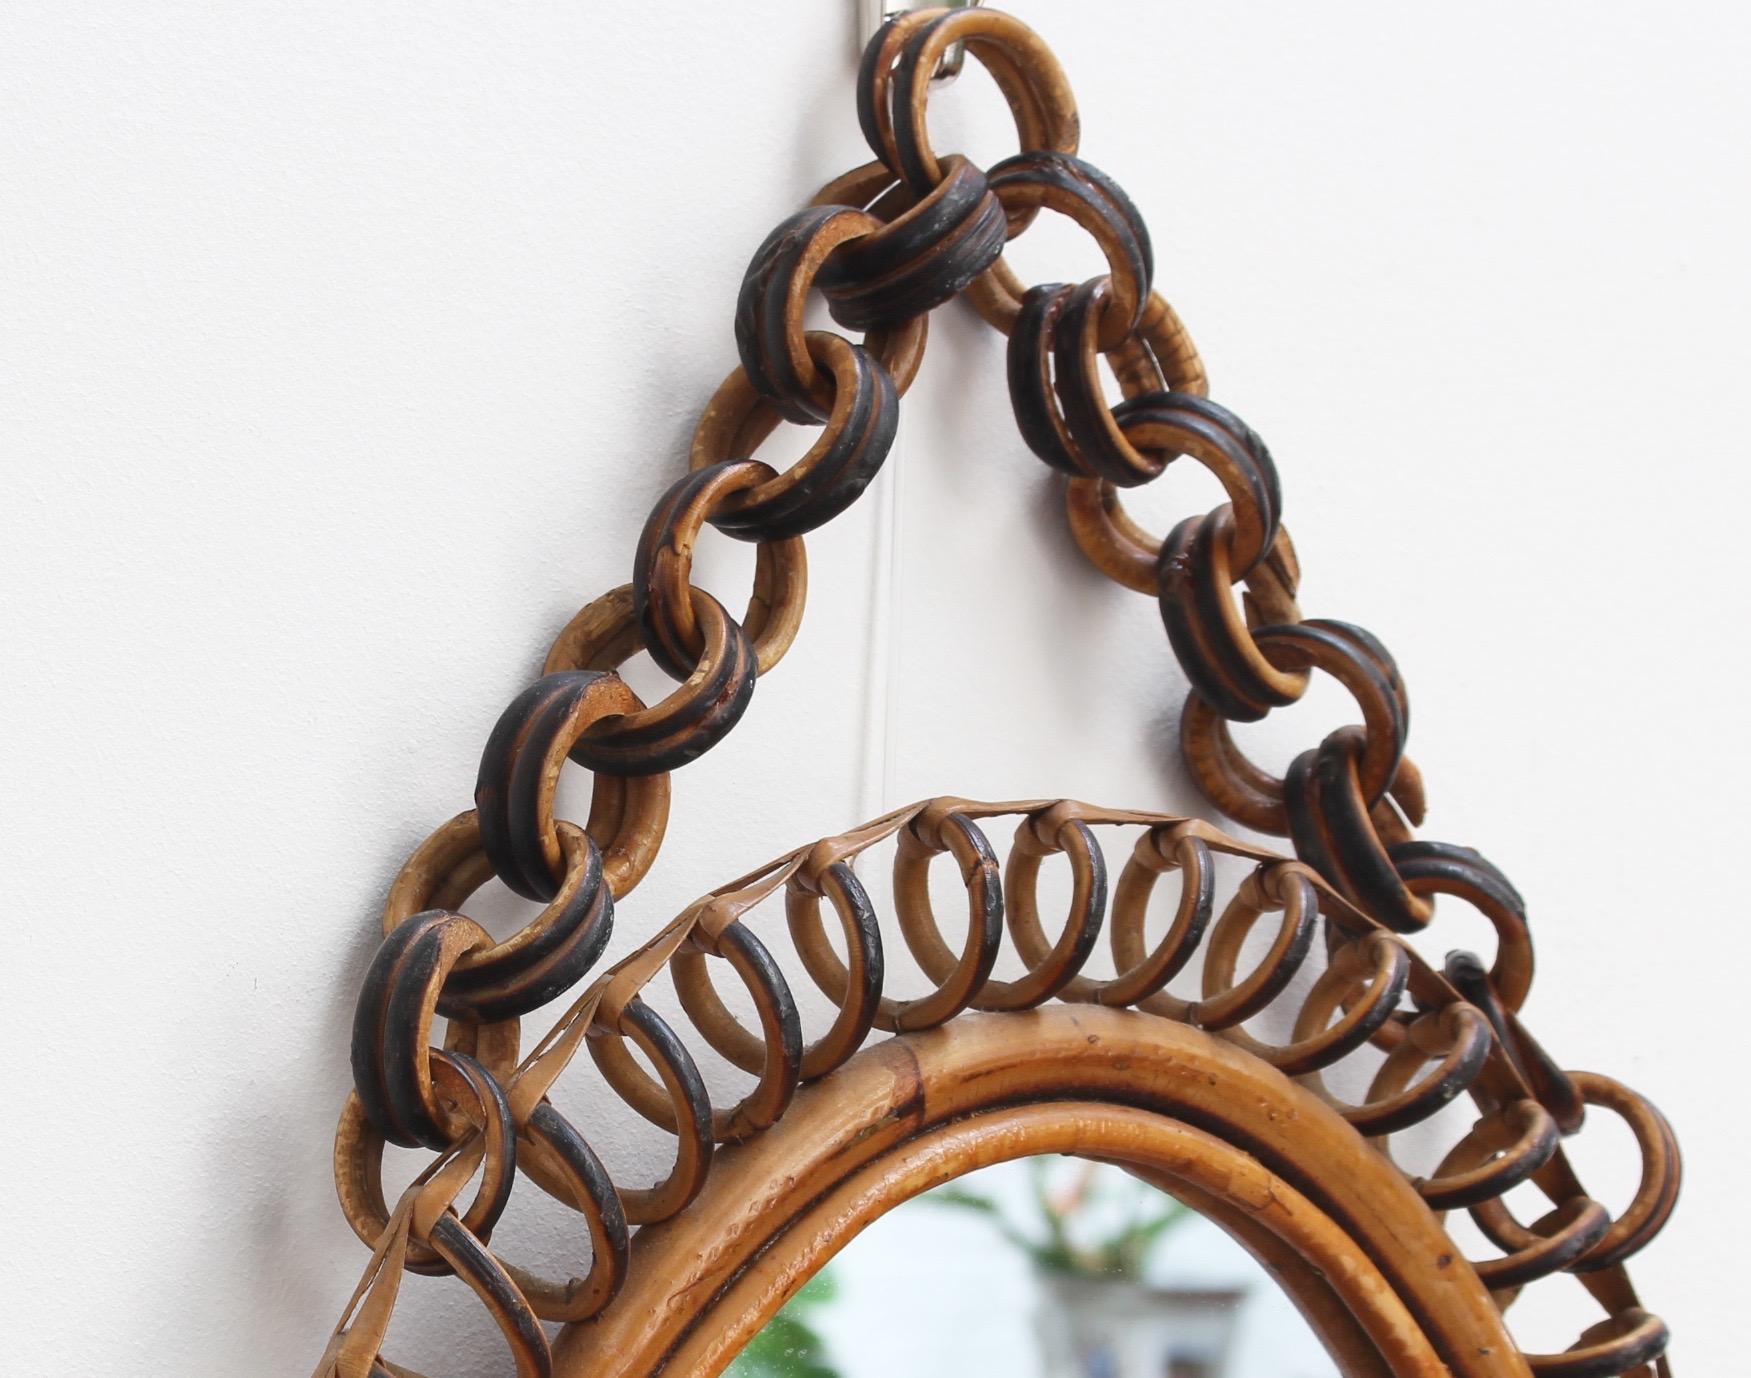 Mid-20th Century Italian Oval-Shaped Rattan Wall Mirror with Hanging Chain 'circa 1960s'